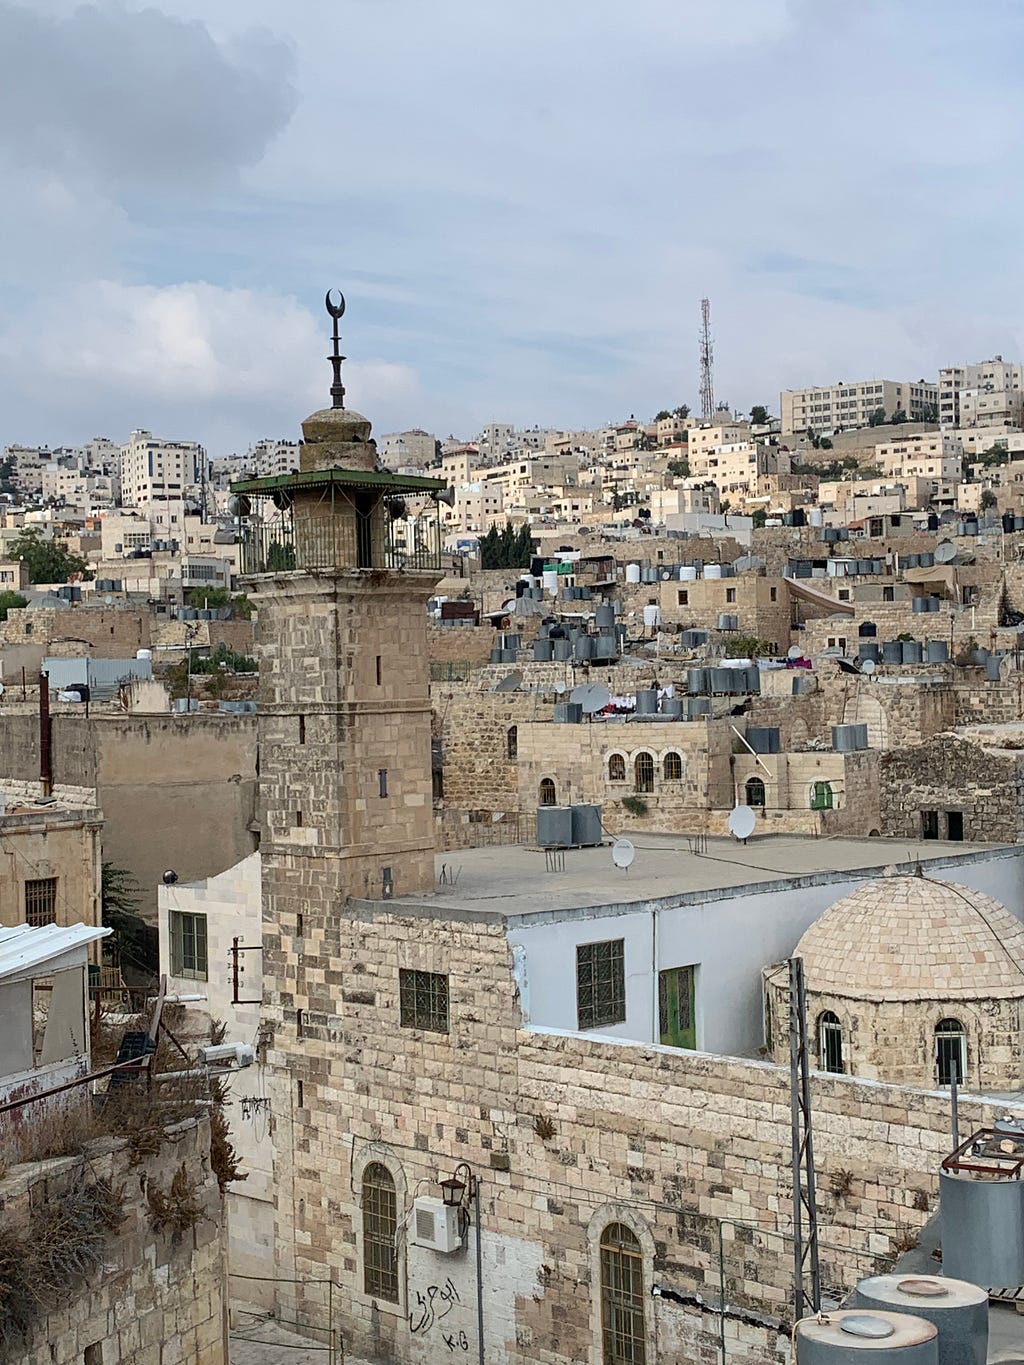 Abrahamic Mosque, al-Khalil (Hebron). The settlers were using it as a synagogue for the Jewish holidays, so Israeli soldiers had the whole area closed, preventing us from visiting it. (Photo by the author, Oct. 3, 2023).